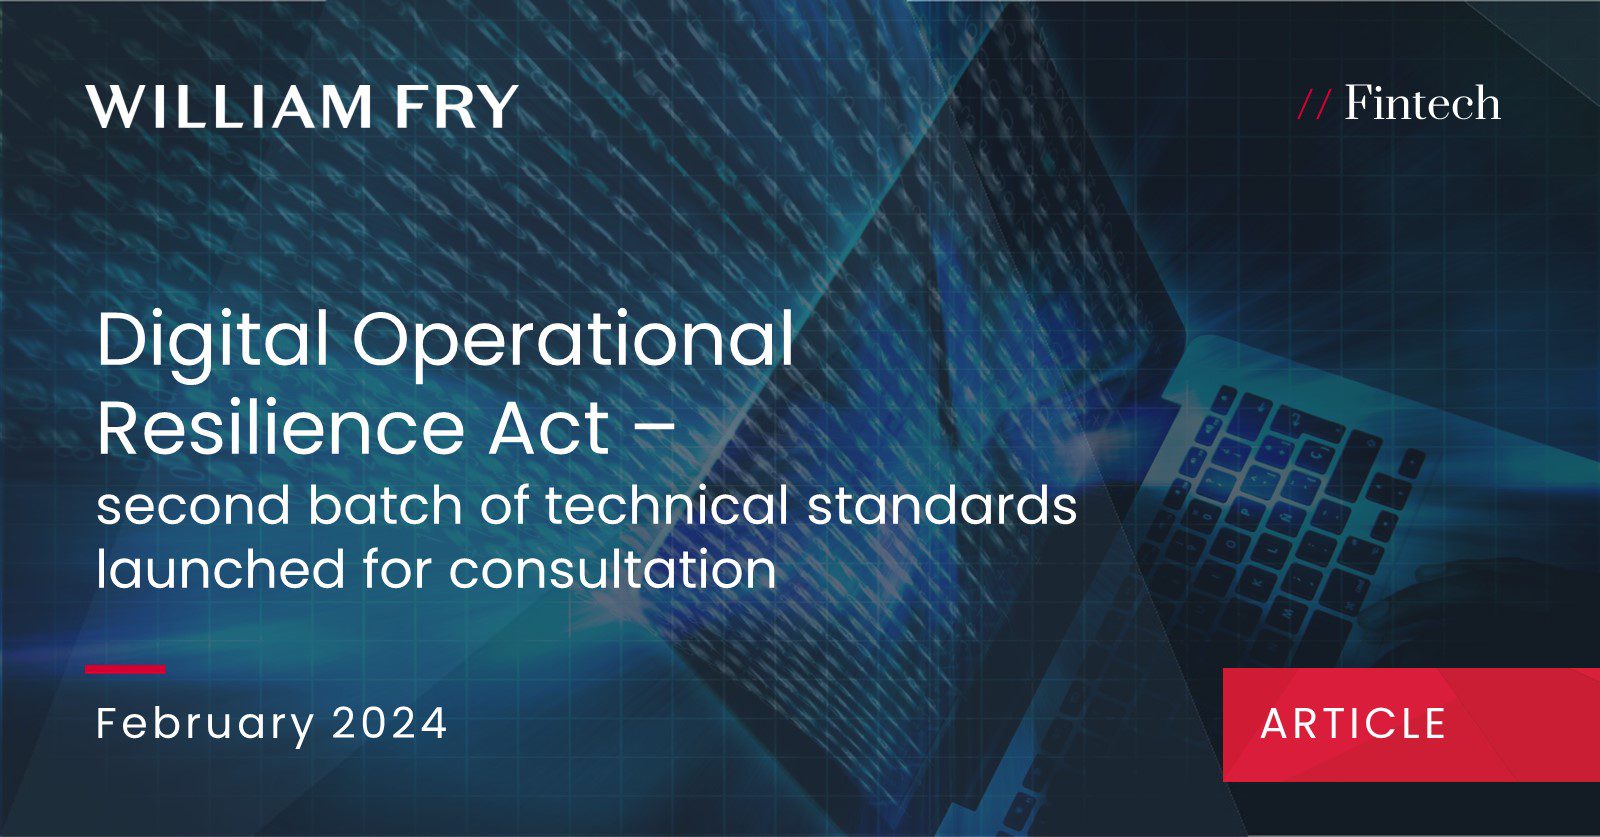 Digital Operational Resilience Act – second batch of technical standards launched for consultation